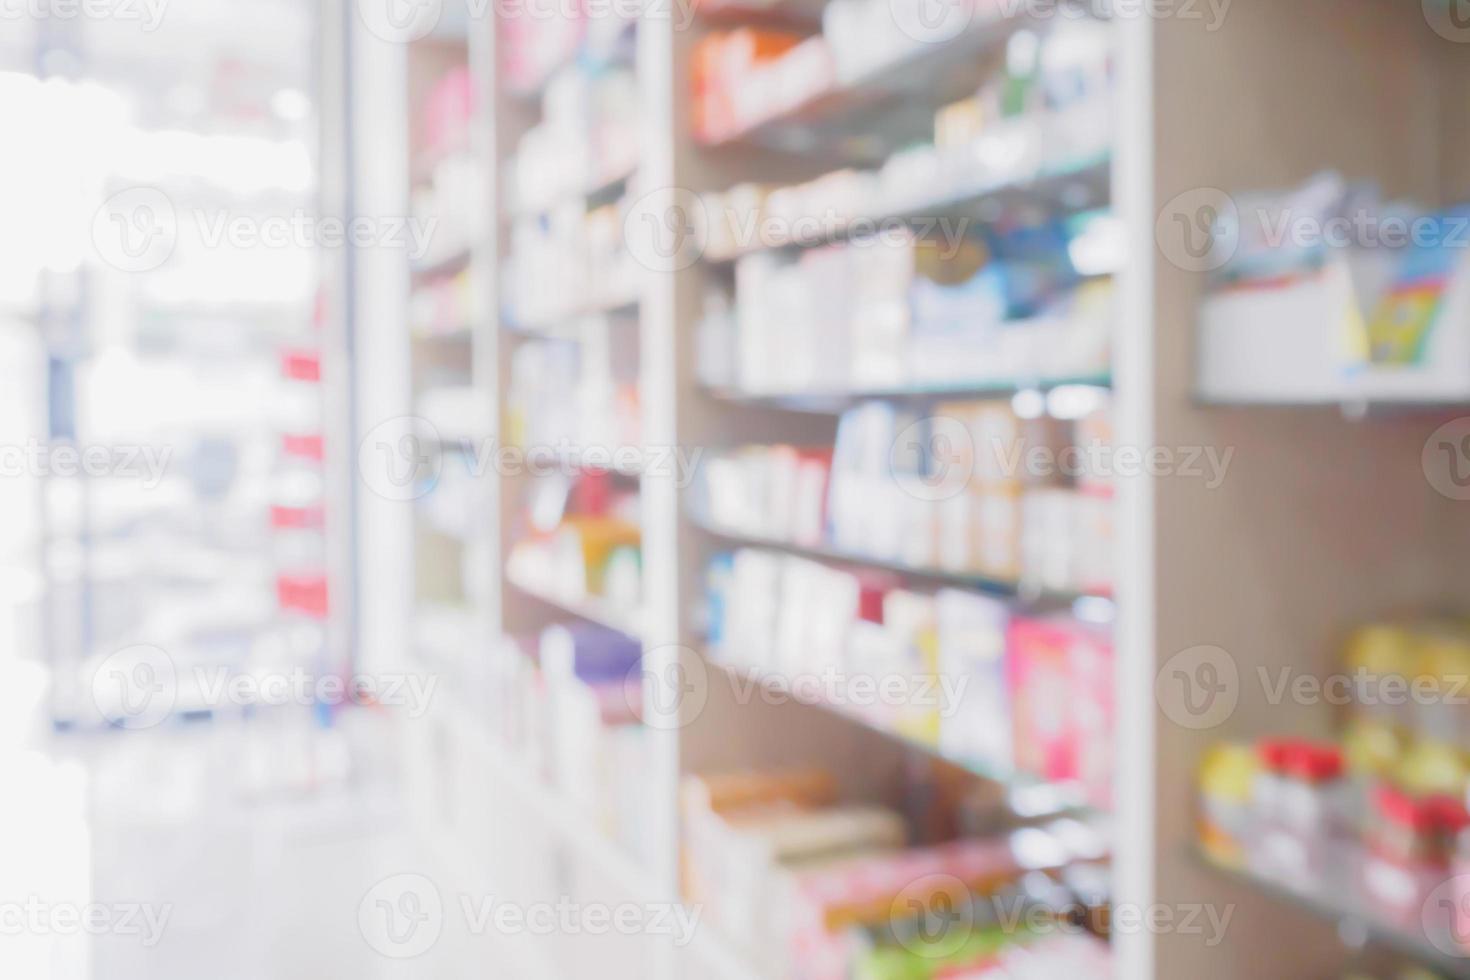 pharmacy store interior with medicine on medical shelves blur background photo